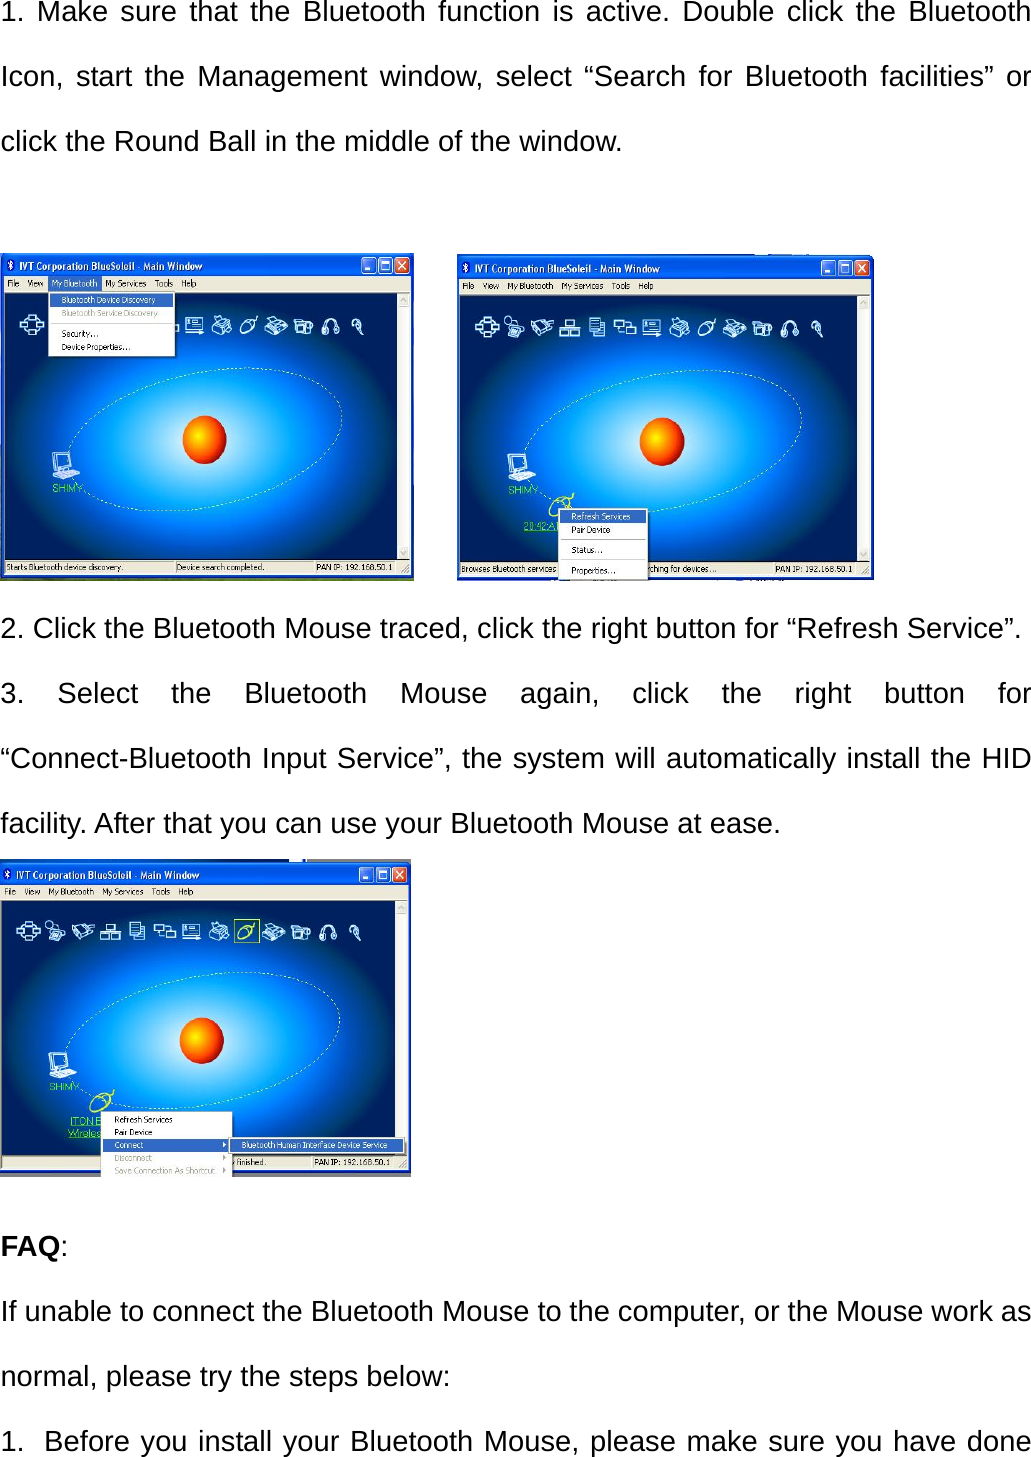   1. Make sure that the Bluetooth function is active. Double click the Bluetooth Icon, start the Management window, select “Search for Bluetooth facilities” or click the Round Ball in the middle of the window.       2. Click the Bluetooth Mouse traced, click the right button for “Refresh Service”. 3. Select the Bluetooth Mouse again, click the right button for “Connect-Bluetooth Input Service”, the system will automatically install the HID facility. After that you can use your Bluetooth Mouse at ease.    FAQ: If unable to connect the Bluetooth Mouse to the computer, or the Mouse work as normal, please try the steps below: 1.  Before you install your Bluetooth Mouse, please make sure you have done 